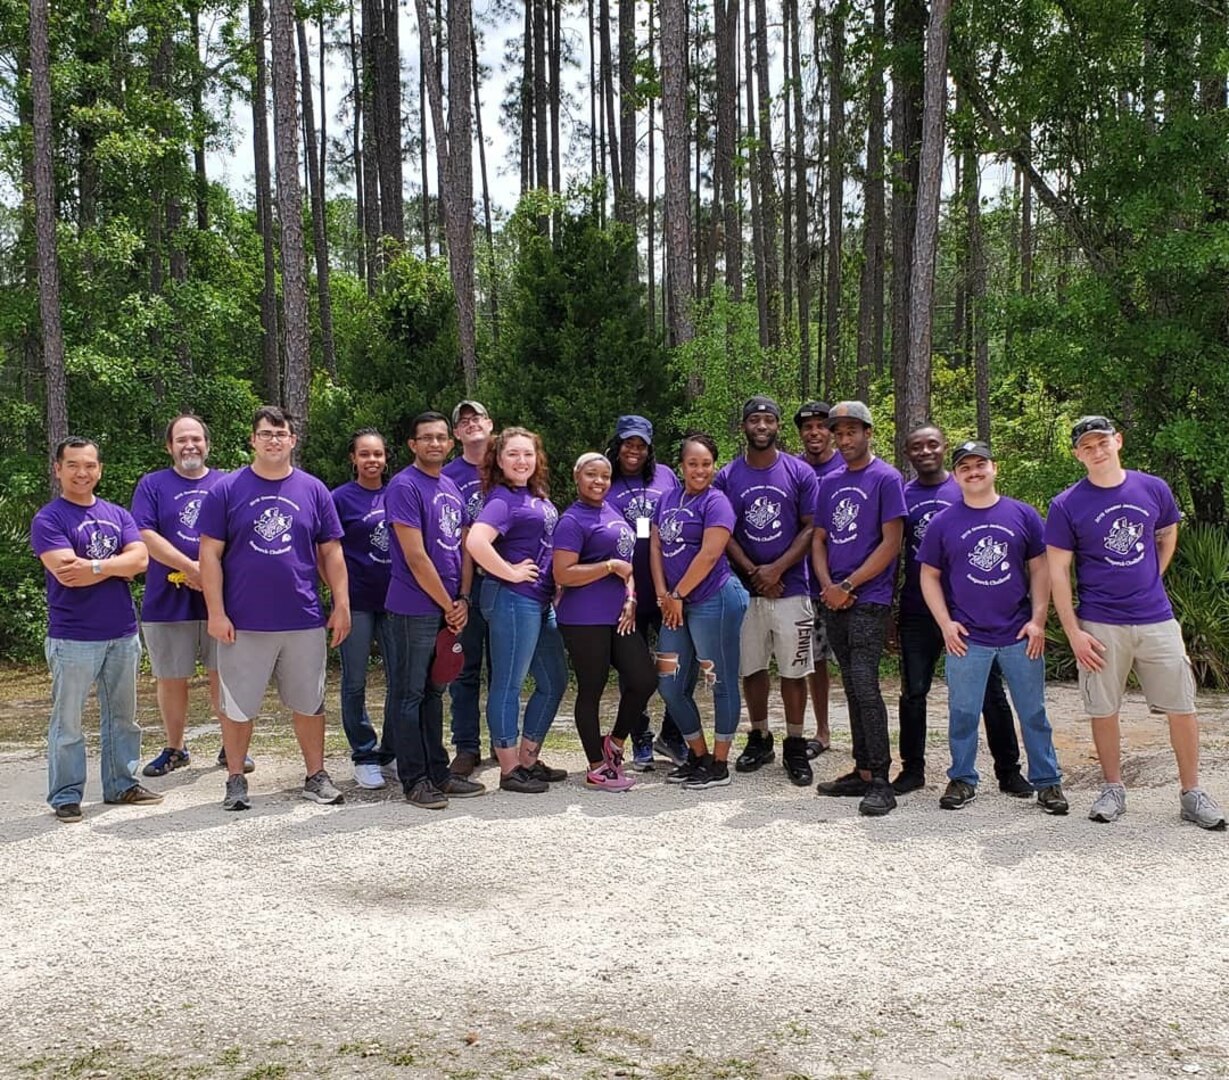 Crystal Taylor (center with hat) stands with volunteers at the 2019 Regional SeaPerch competition held in Jacksonville, Fla.  Volunteers from SERMC supported four SeaPerch teams that went on to compete and place in the 2017 through 2021 SeaPerch National Challenge.